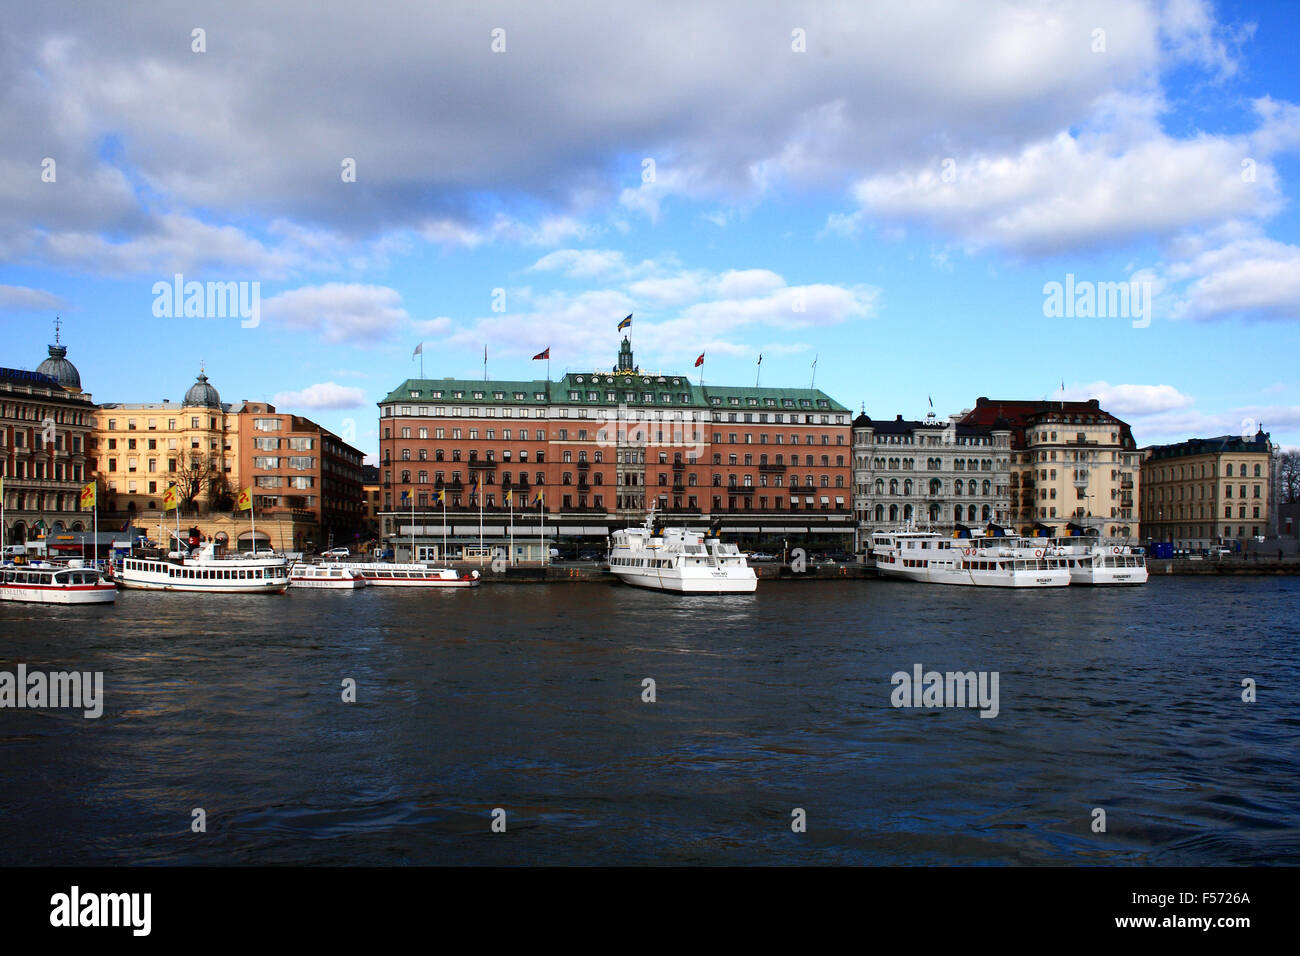 Stockholms Ström, as this innermost part of the archipelago is called, with the Grand Hotel in the picture. Stock Photo